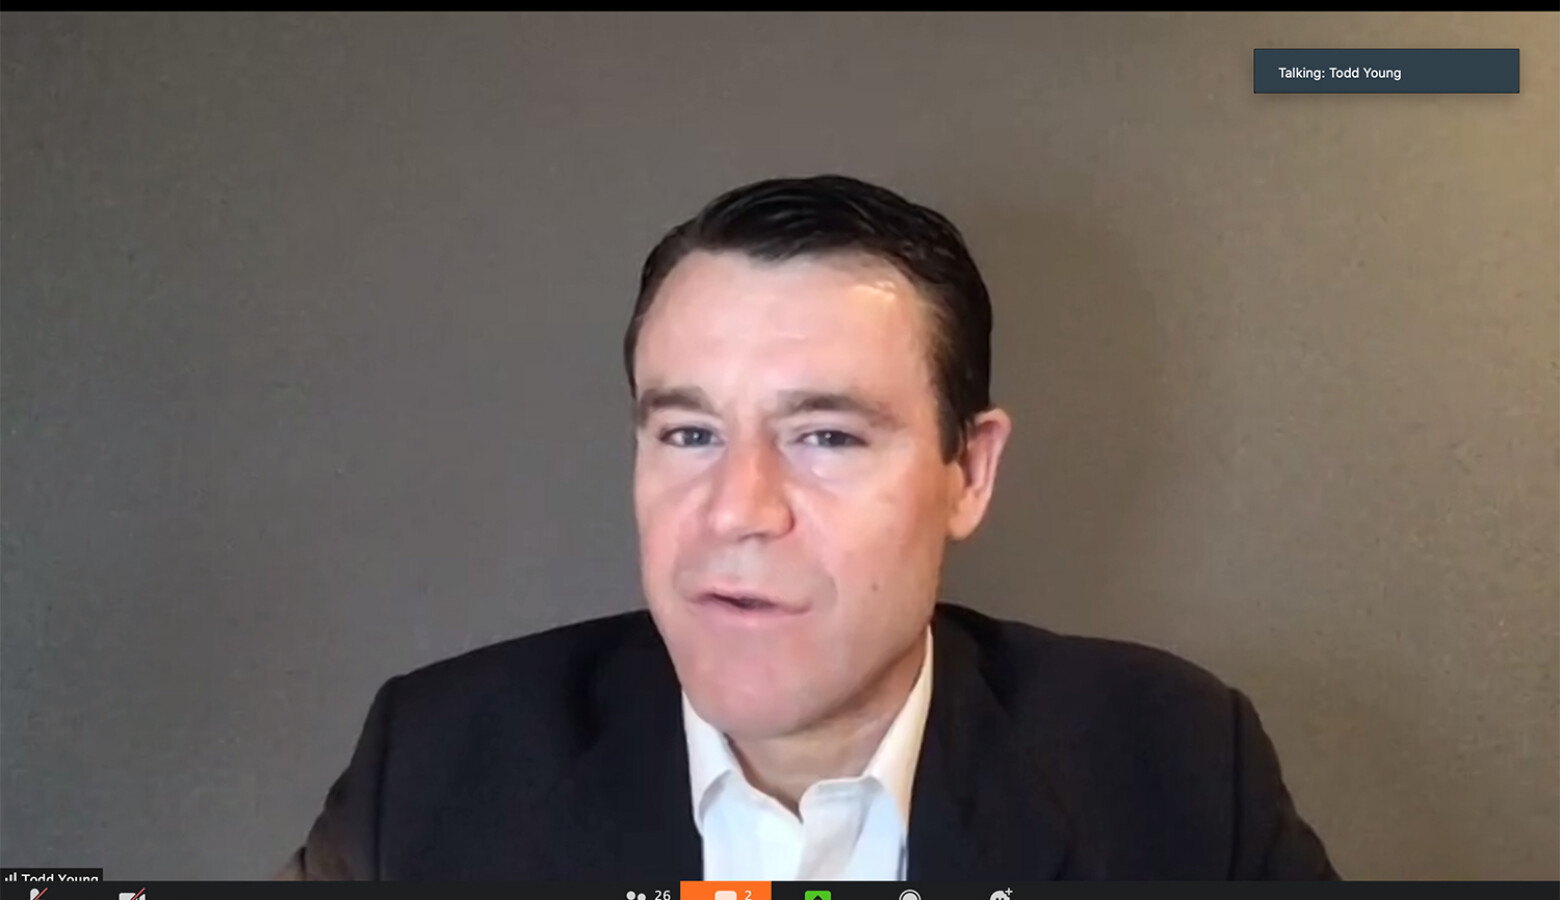 Sen. Todd Young (R-Ind.) says the federal Payment Protection Program funding is meant for small businesses – and big companies that received some of the money should return it. (Screenshot of Zoom call)